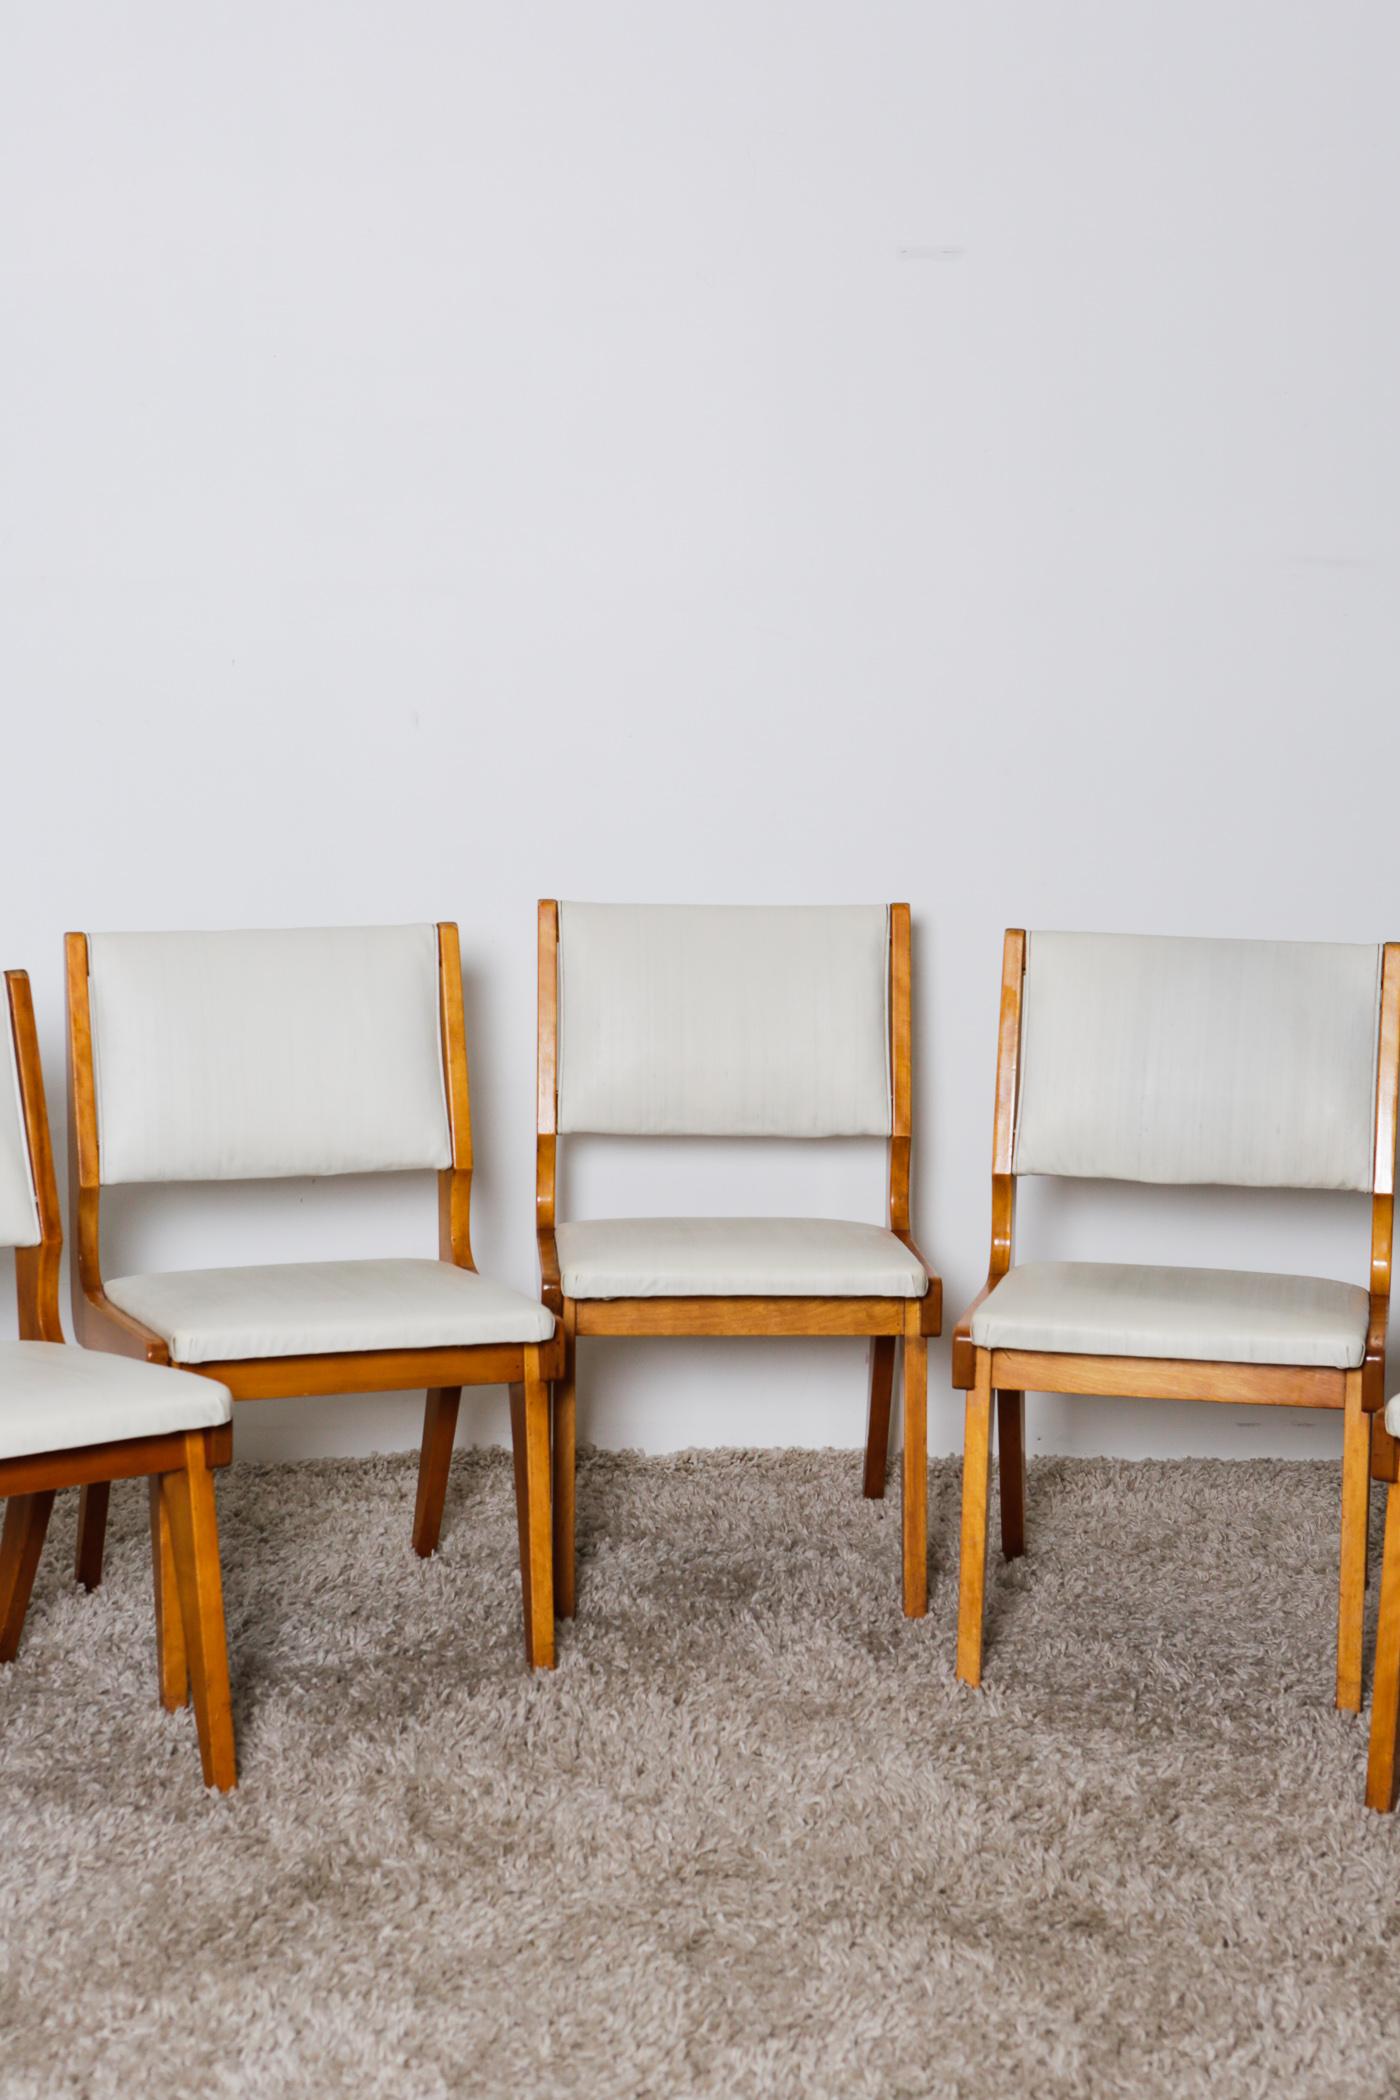 1960s Mid-Century Modern Maple Wood Dining Chairs #5976 by Feldman Brothers For Sale 5